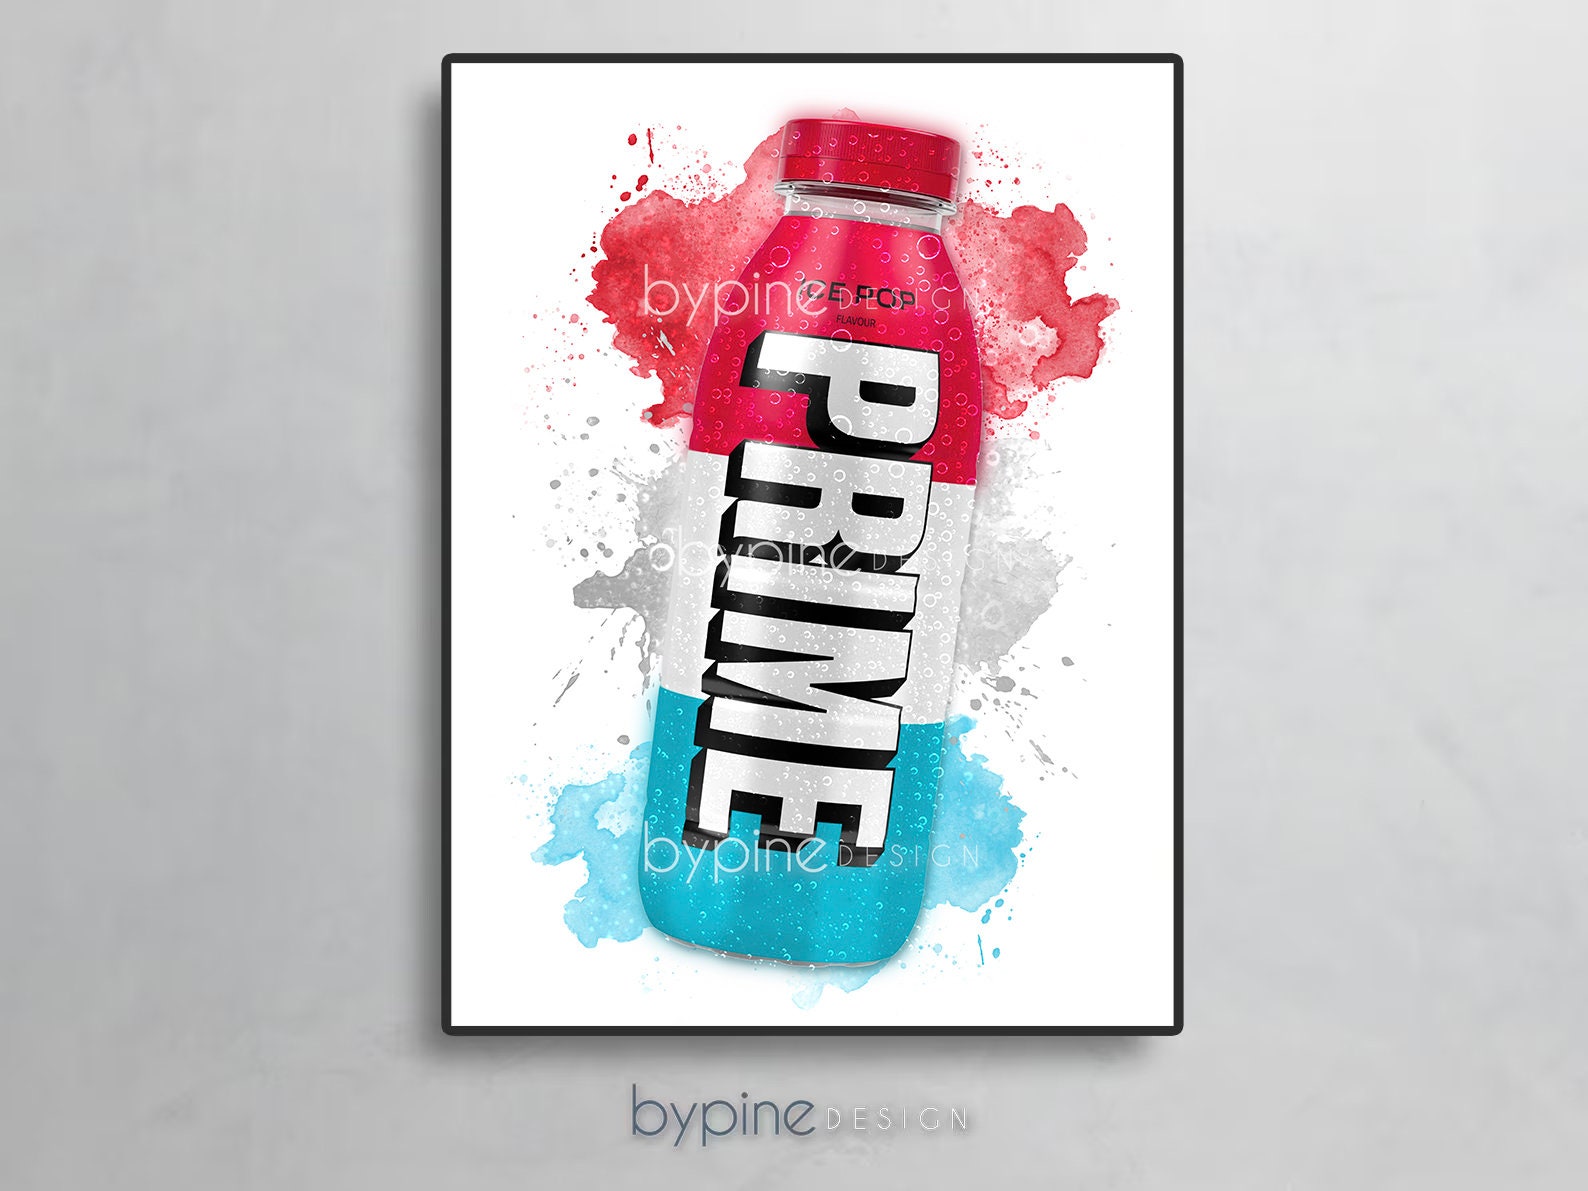 Prime Water Bottle - Ice Pop Design (1 Bottle) by PRIME at the